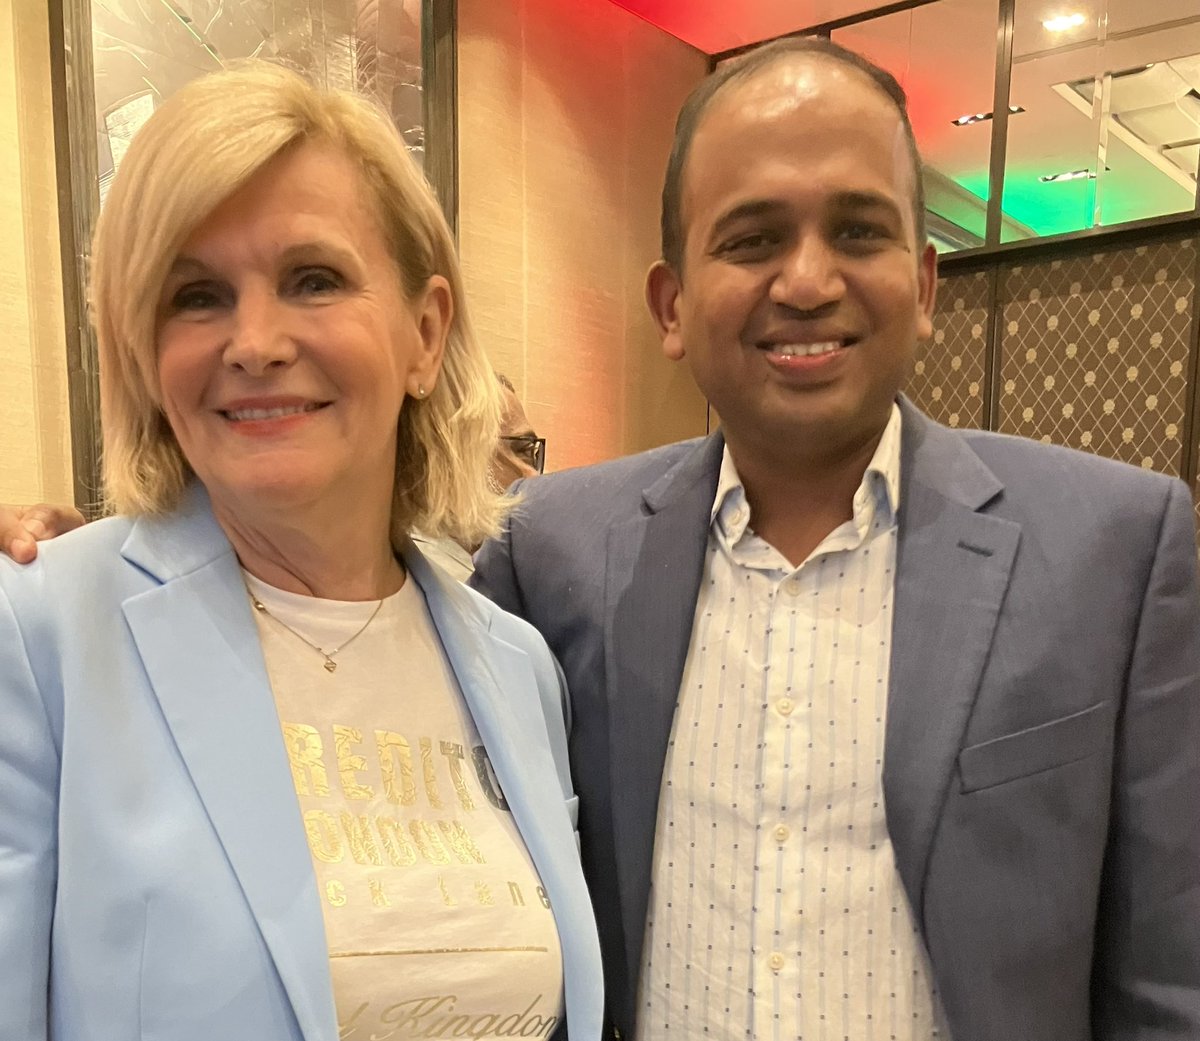 Always a pleasure to meet the immensely inspiring and charismatic @DrMariaNeira  from @WHO - she continues to be a leading champion for advancing development at the nexus of health-climate-energy-equity #wha77  #worldhealthassembly #geneva